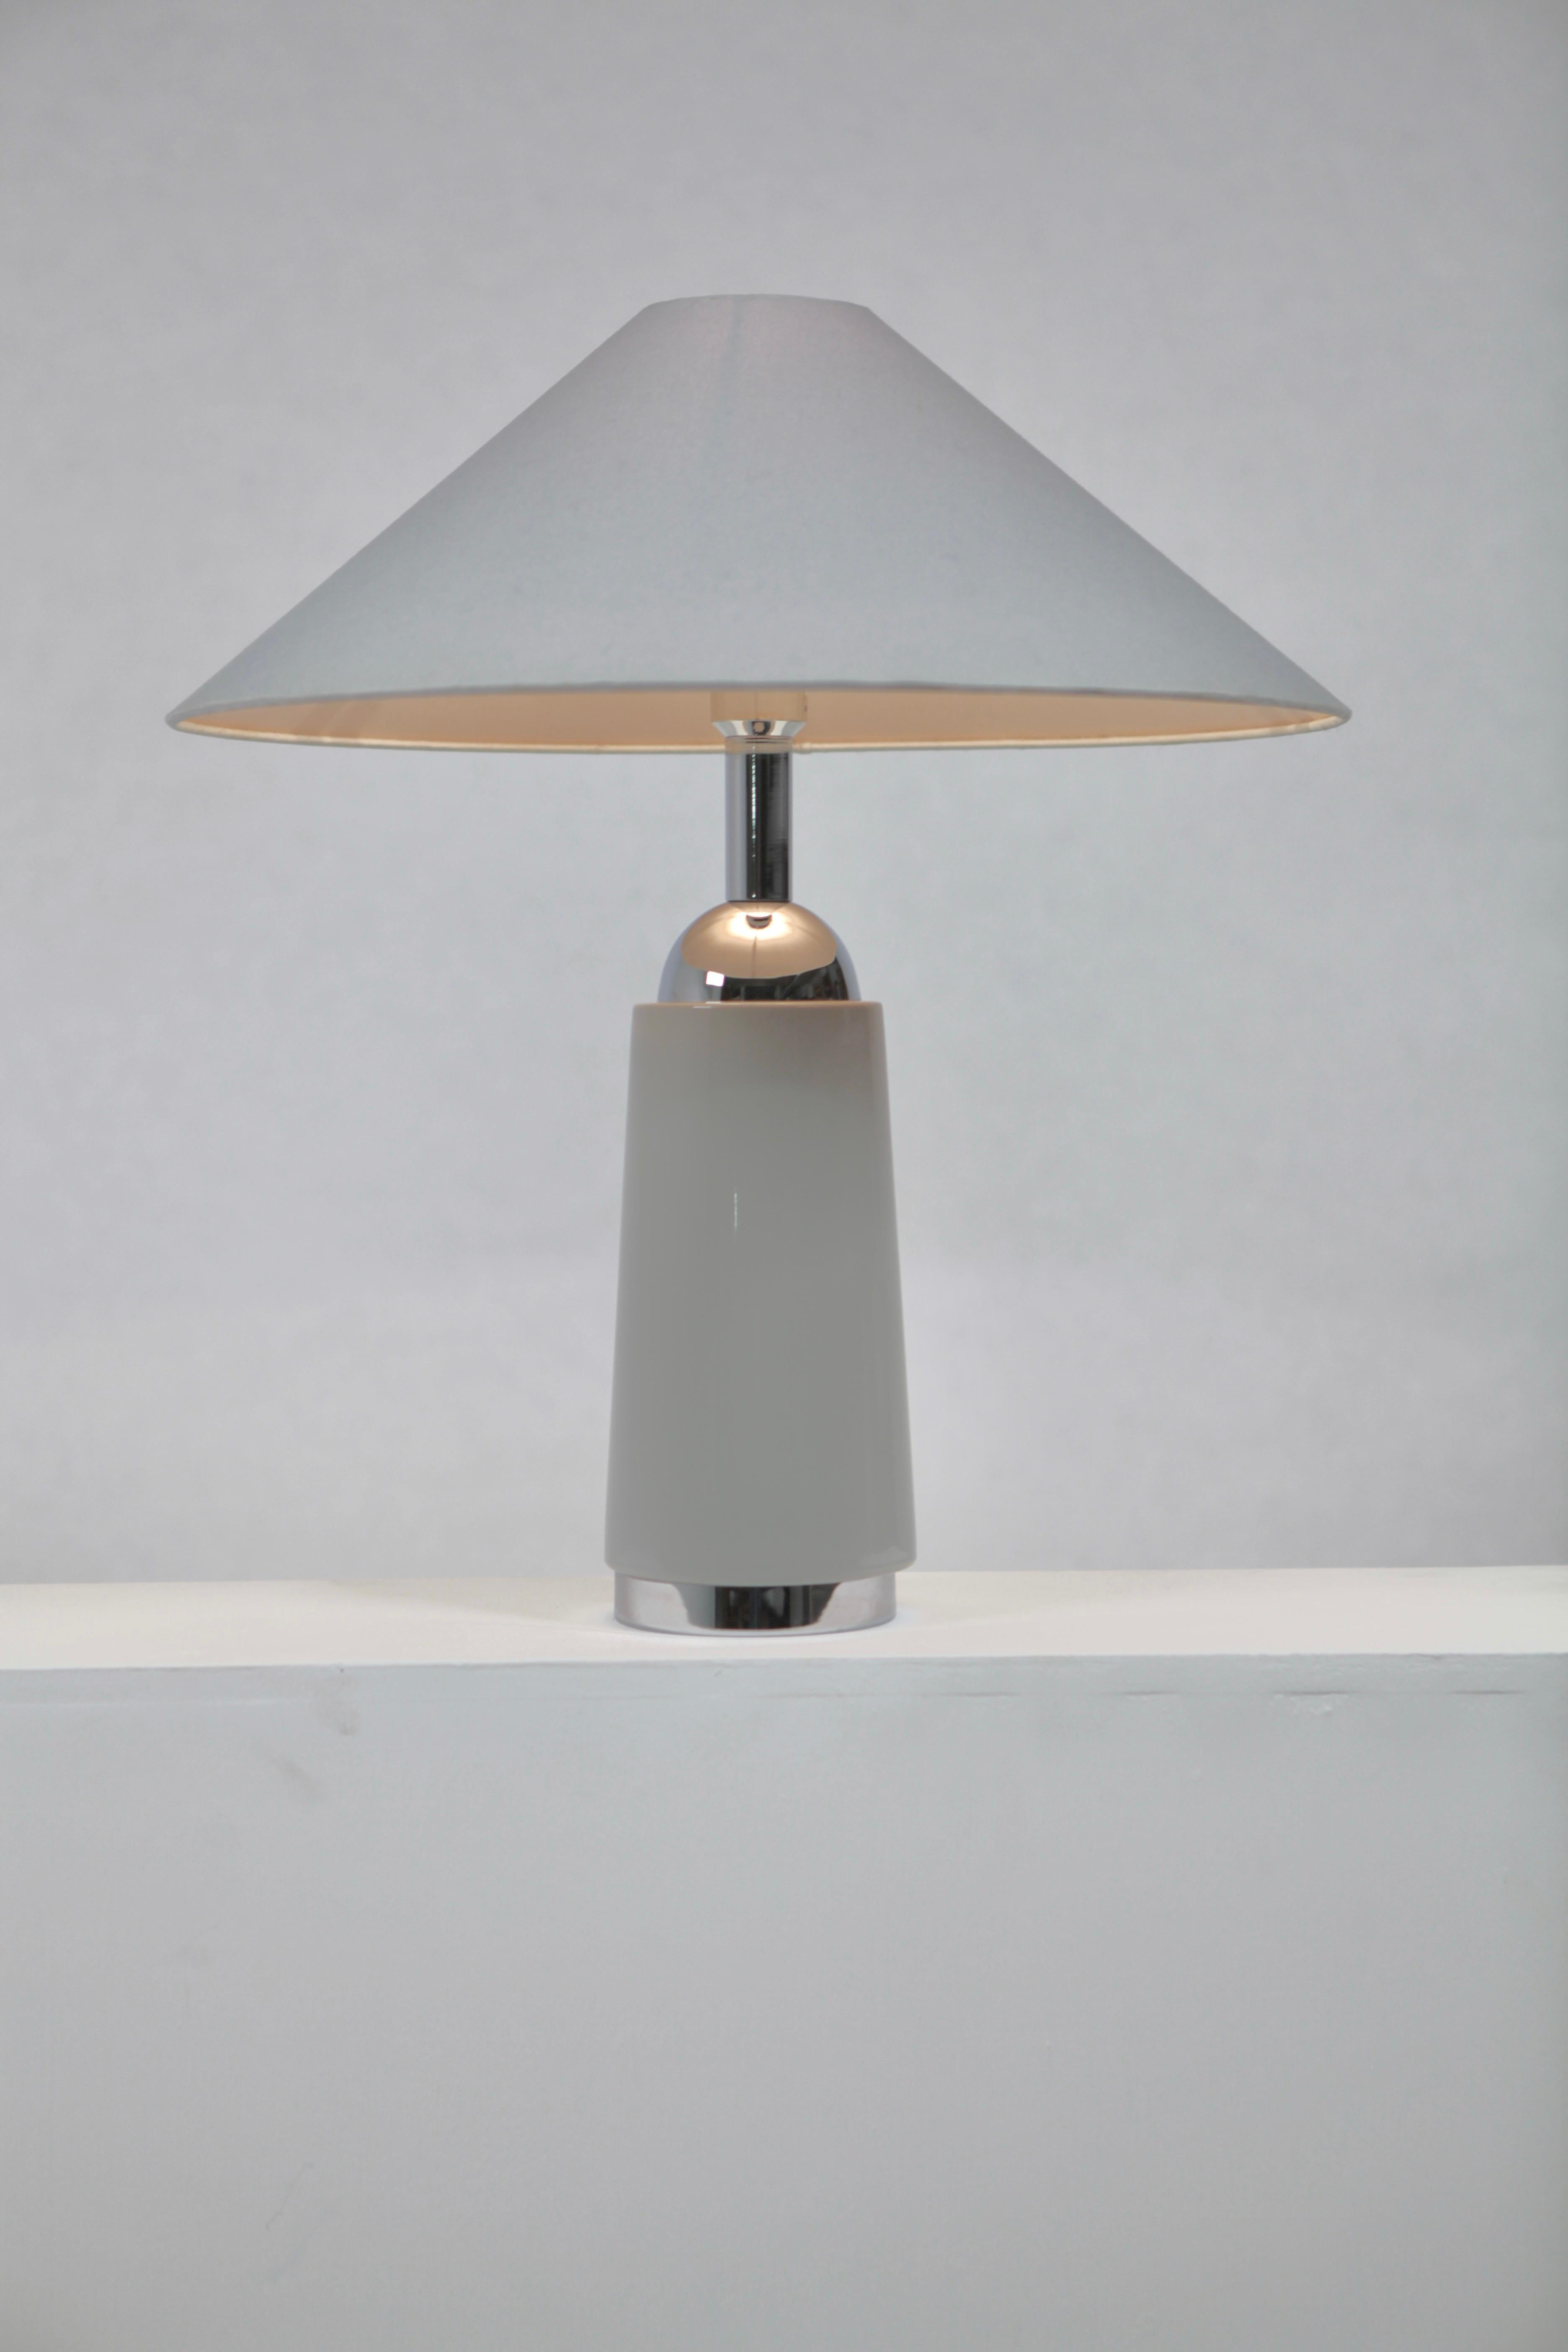 A rare Hans-Agne Jakobsson table lamp in blueish grey faded porcelain and chromed metal in perfect vintage condition. Measures: Height with shade 60cm, diameter shade 52cm, depth base 15 cm, base without shade 45 cm.
Signed with paper label HAJ